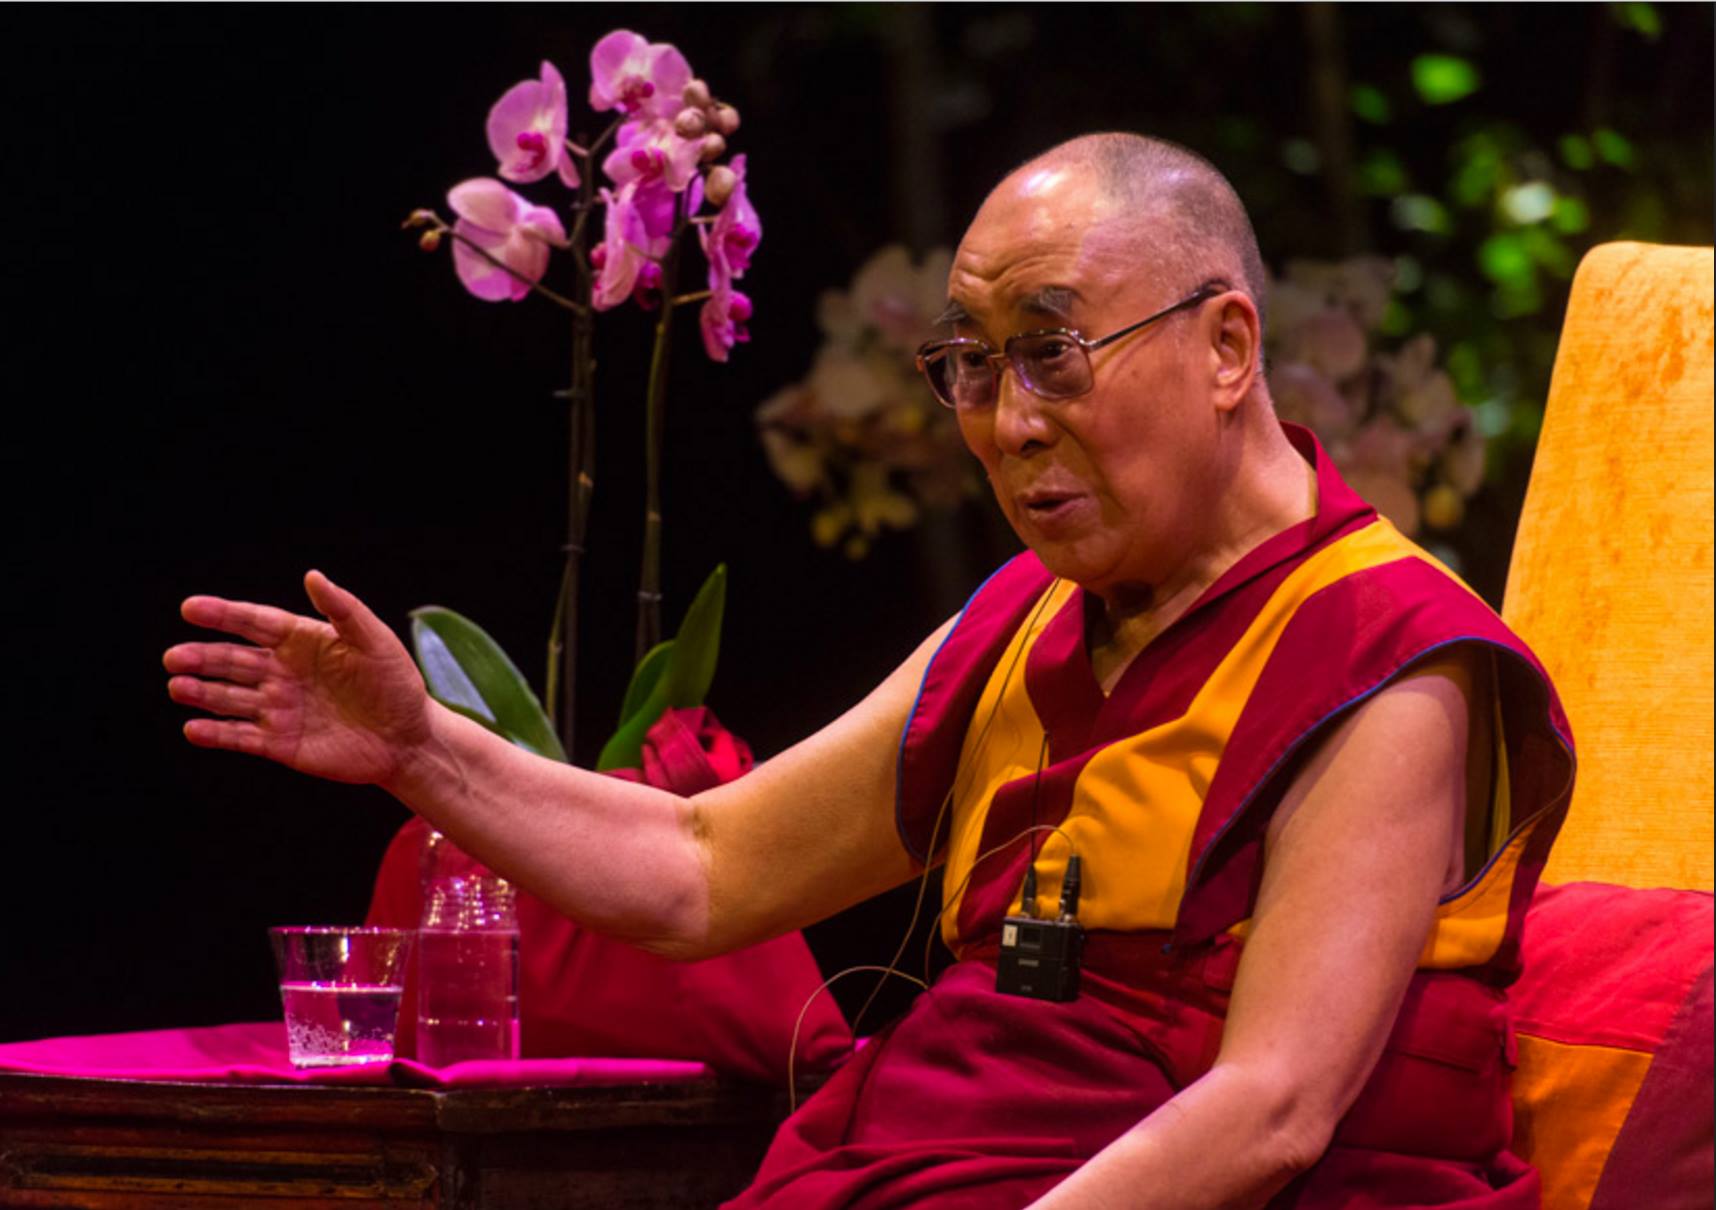 His Holiness the Dalai Lama: Then Tsongkhapa explains what exactly is bodhicitta.